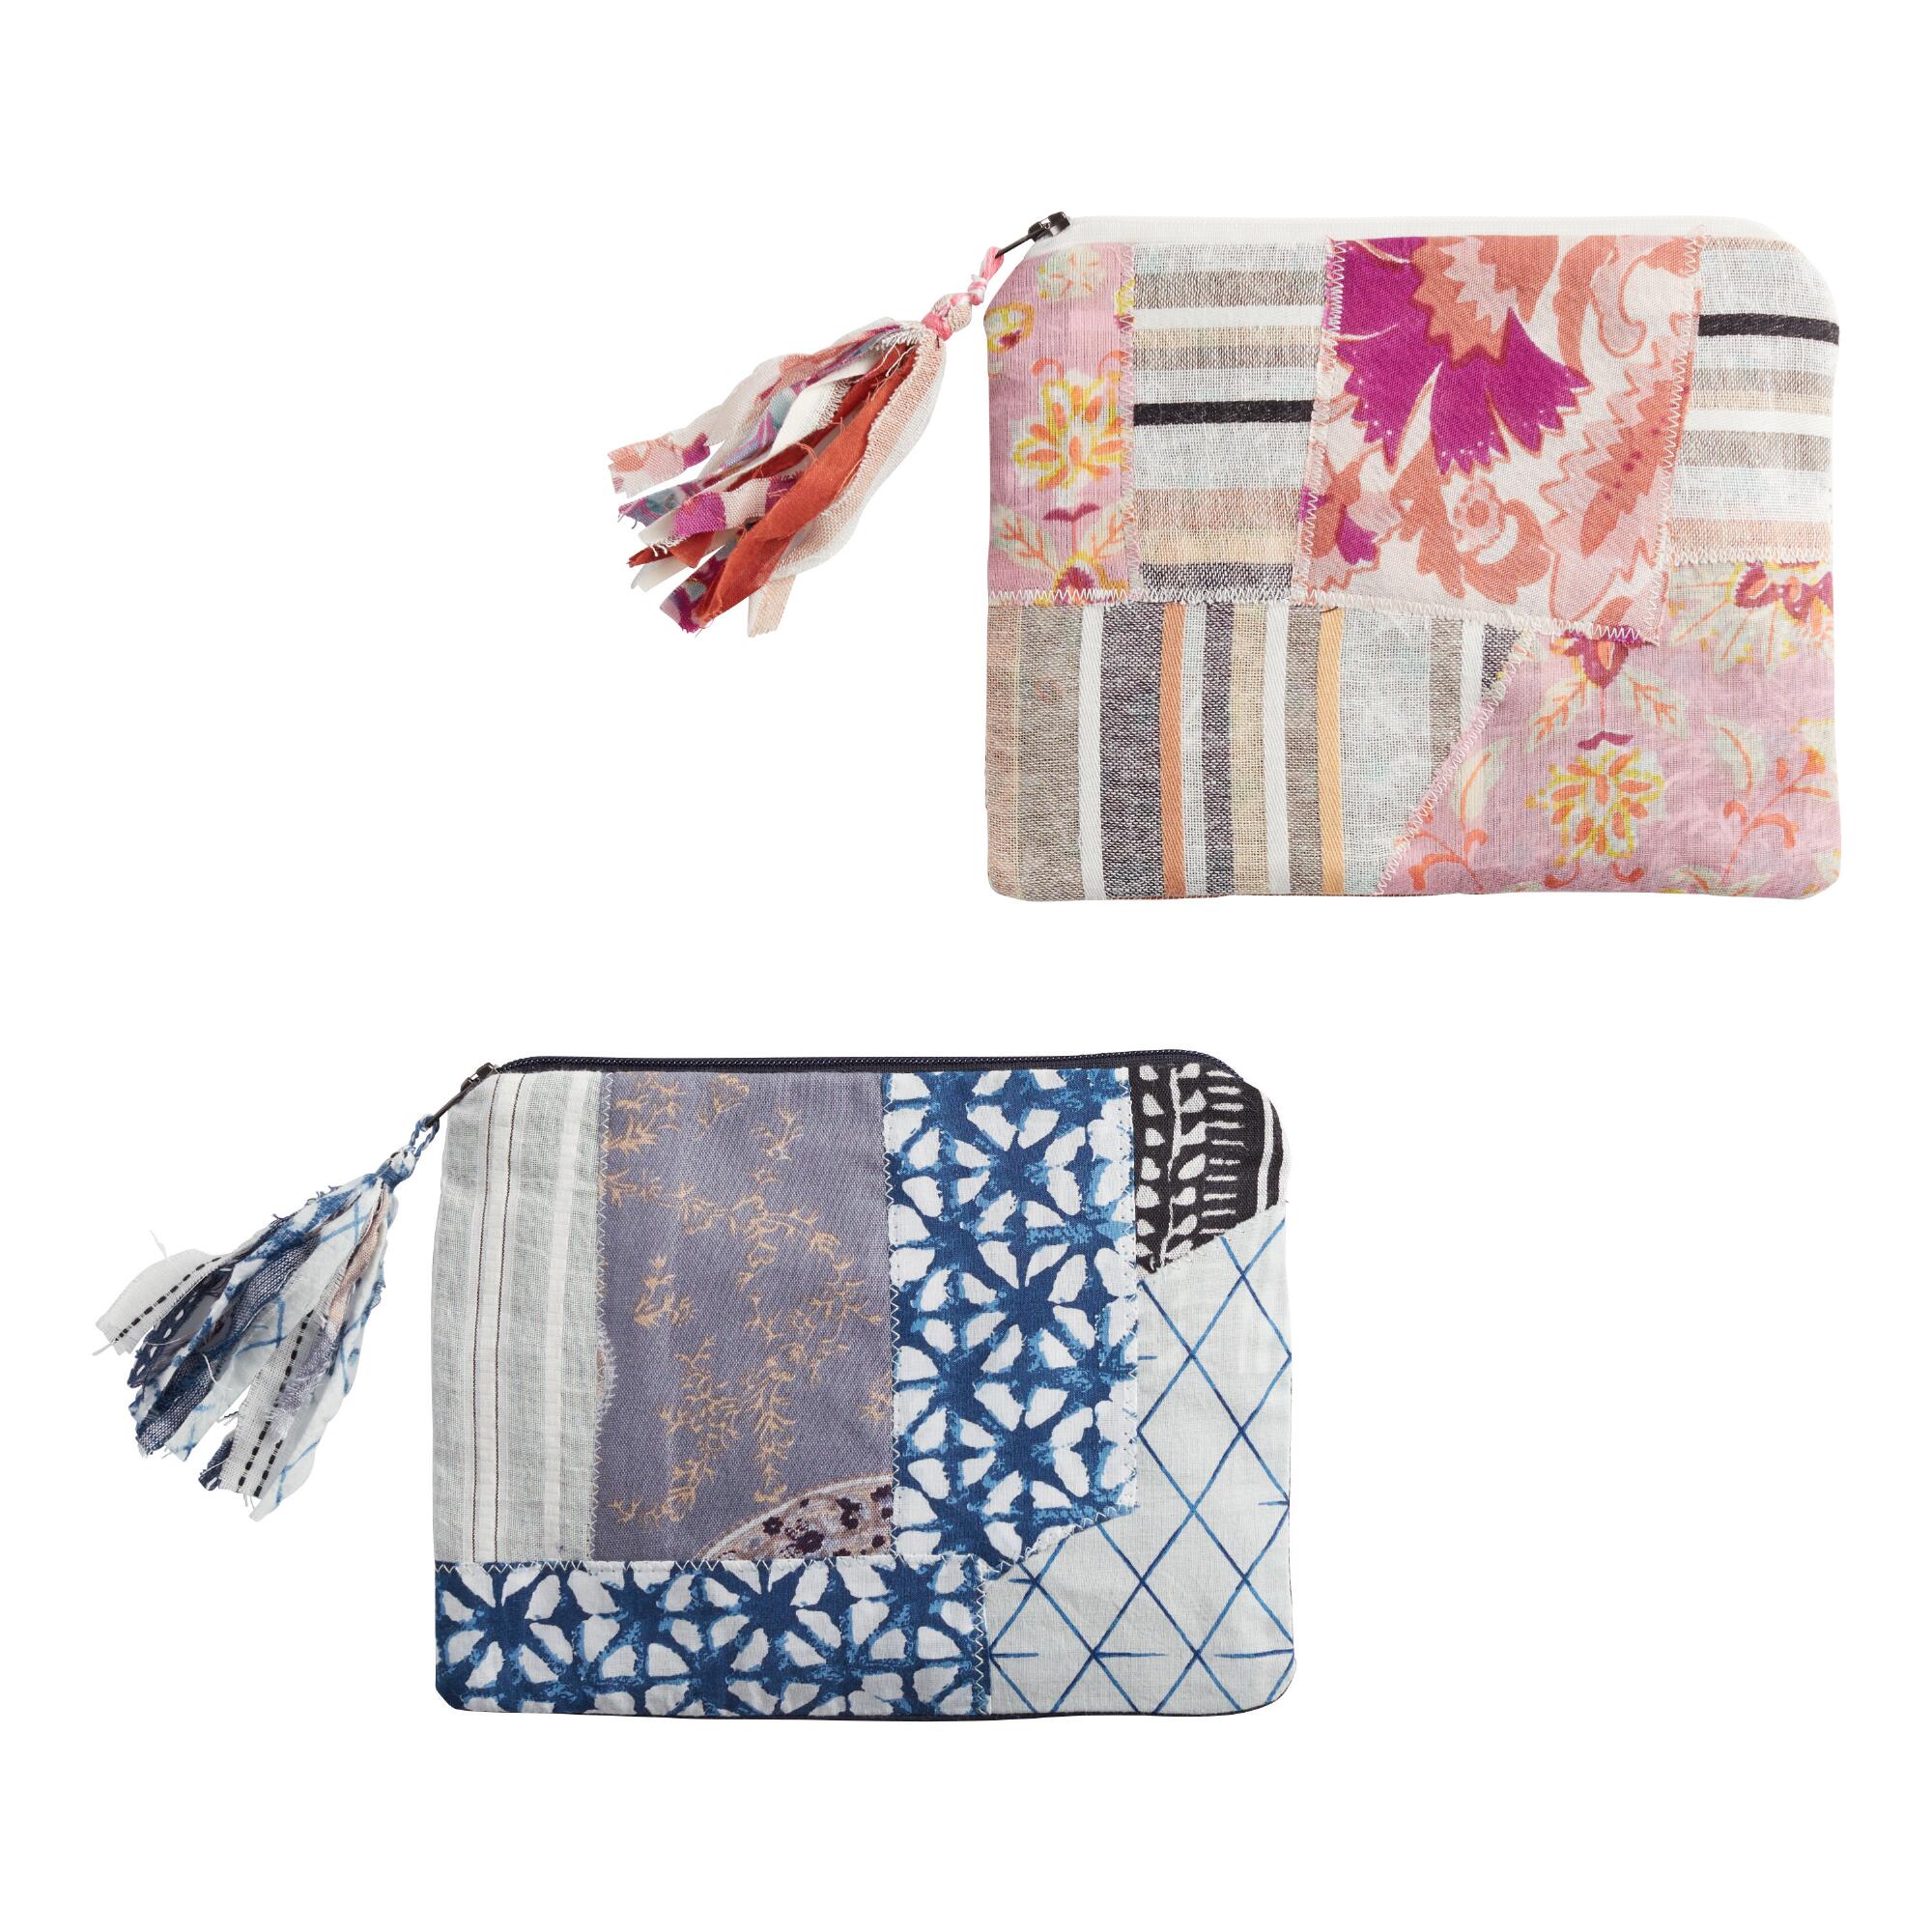 Upcycled Fabric Silaiwali Zip Pouch Set of 2: Multi - Cotton by World Market